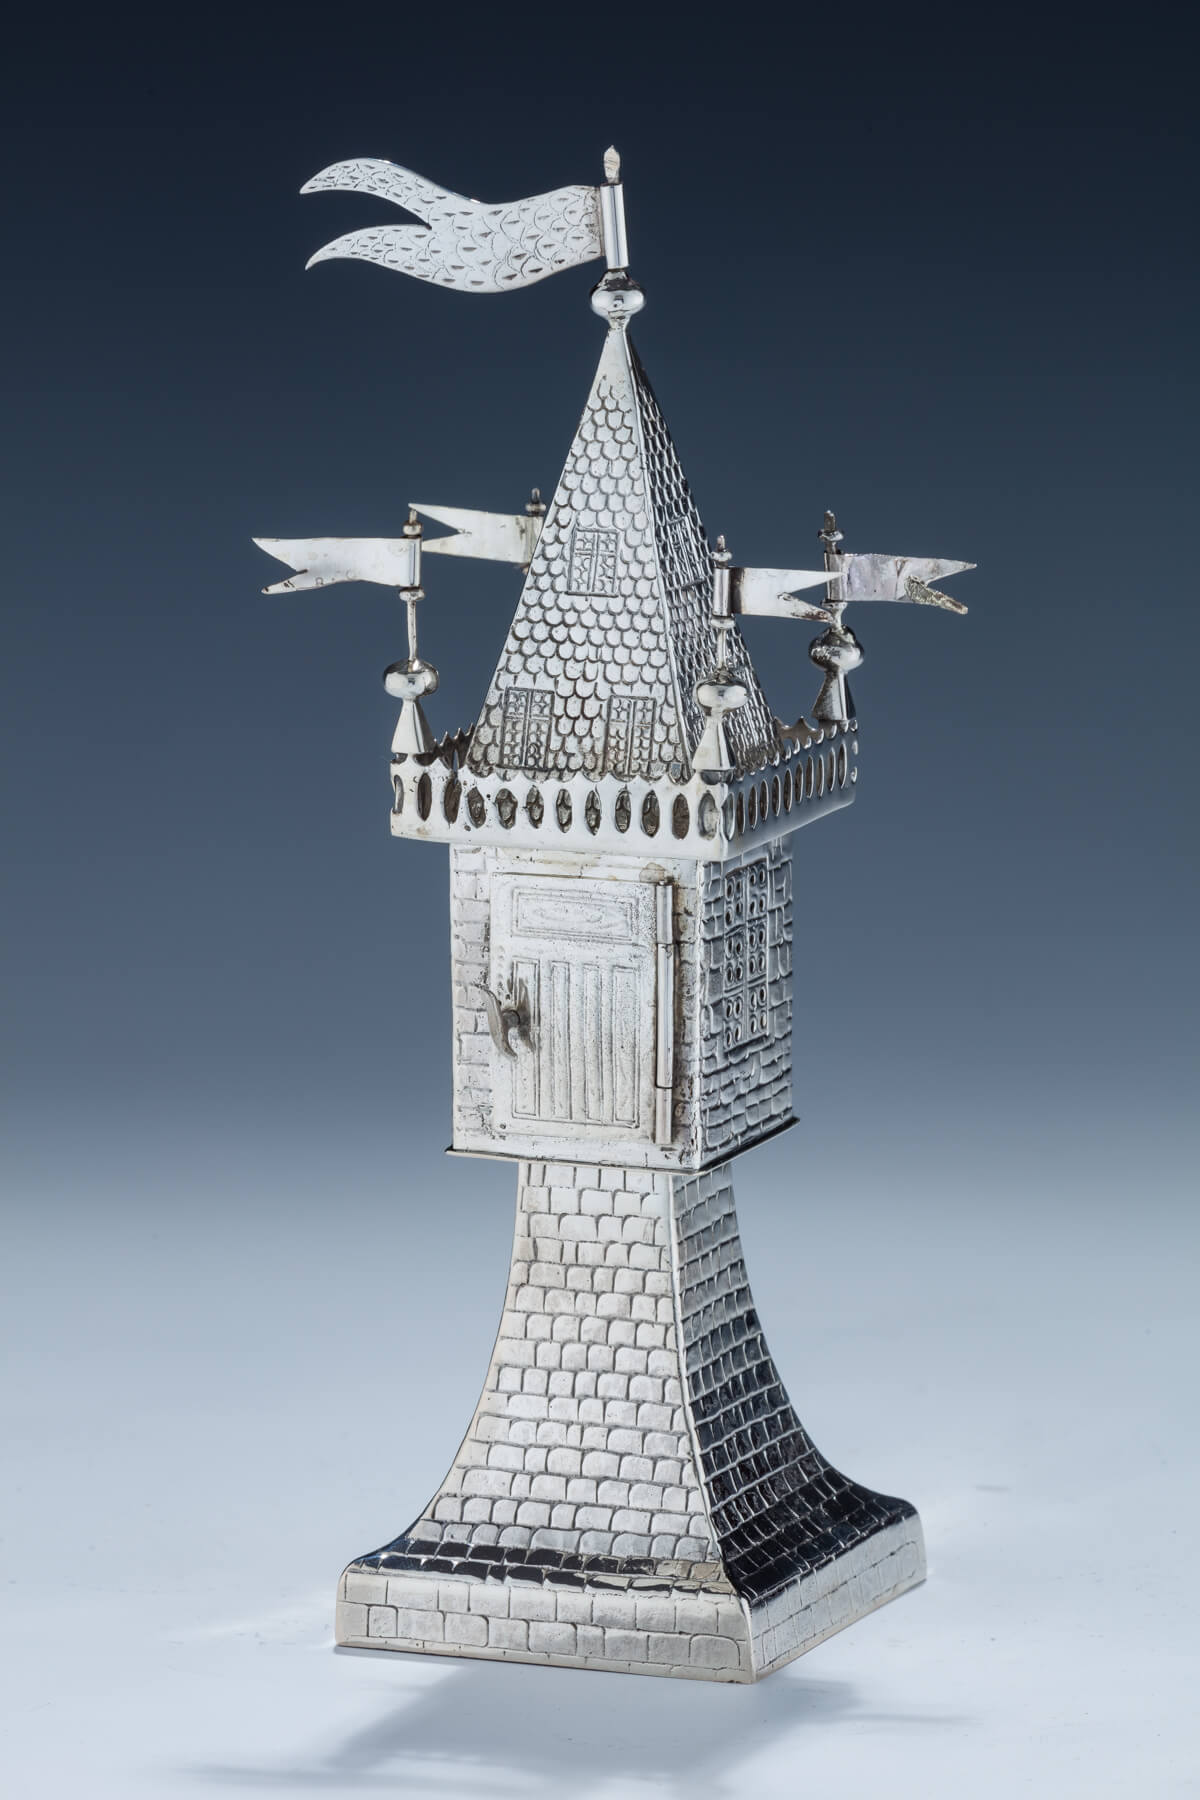 72. A Silver Spice Tower